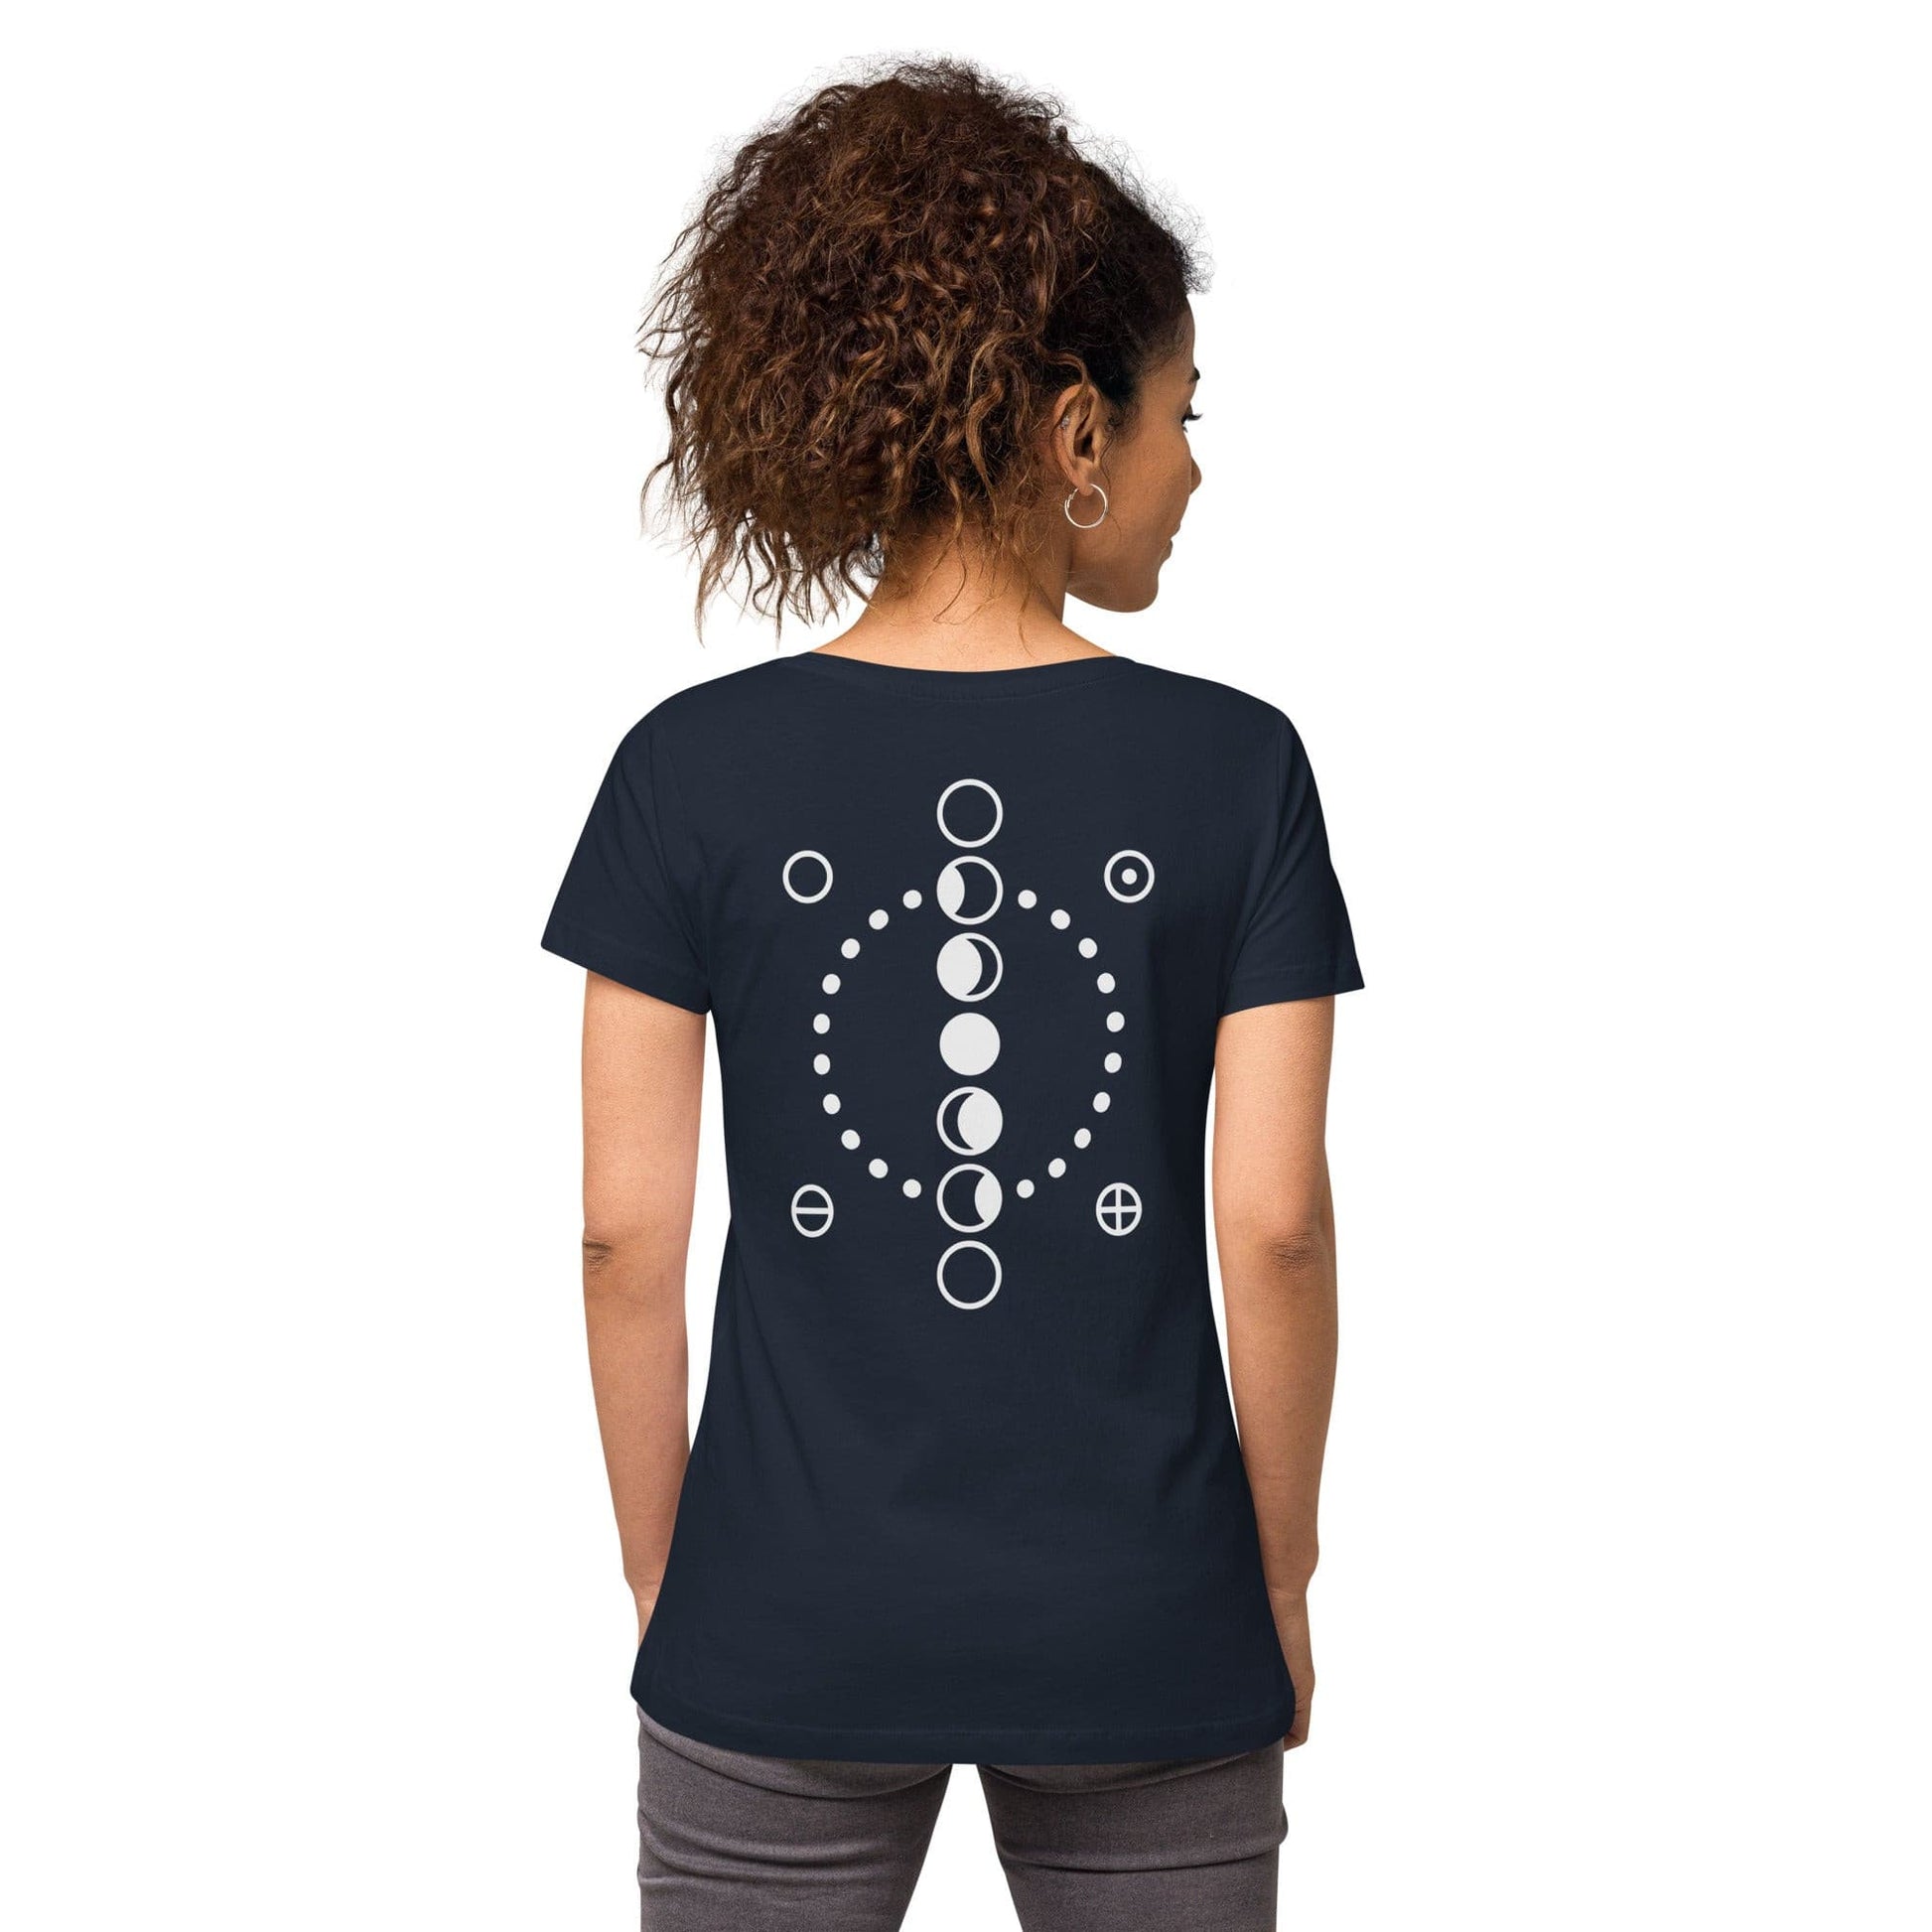 Moon Phases Women’s fitted v-neck t-shirt.